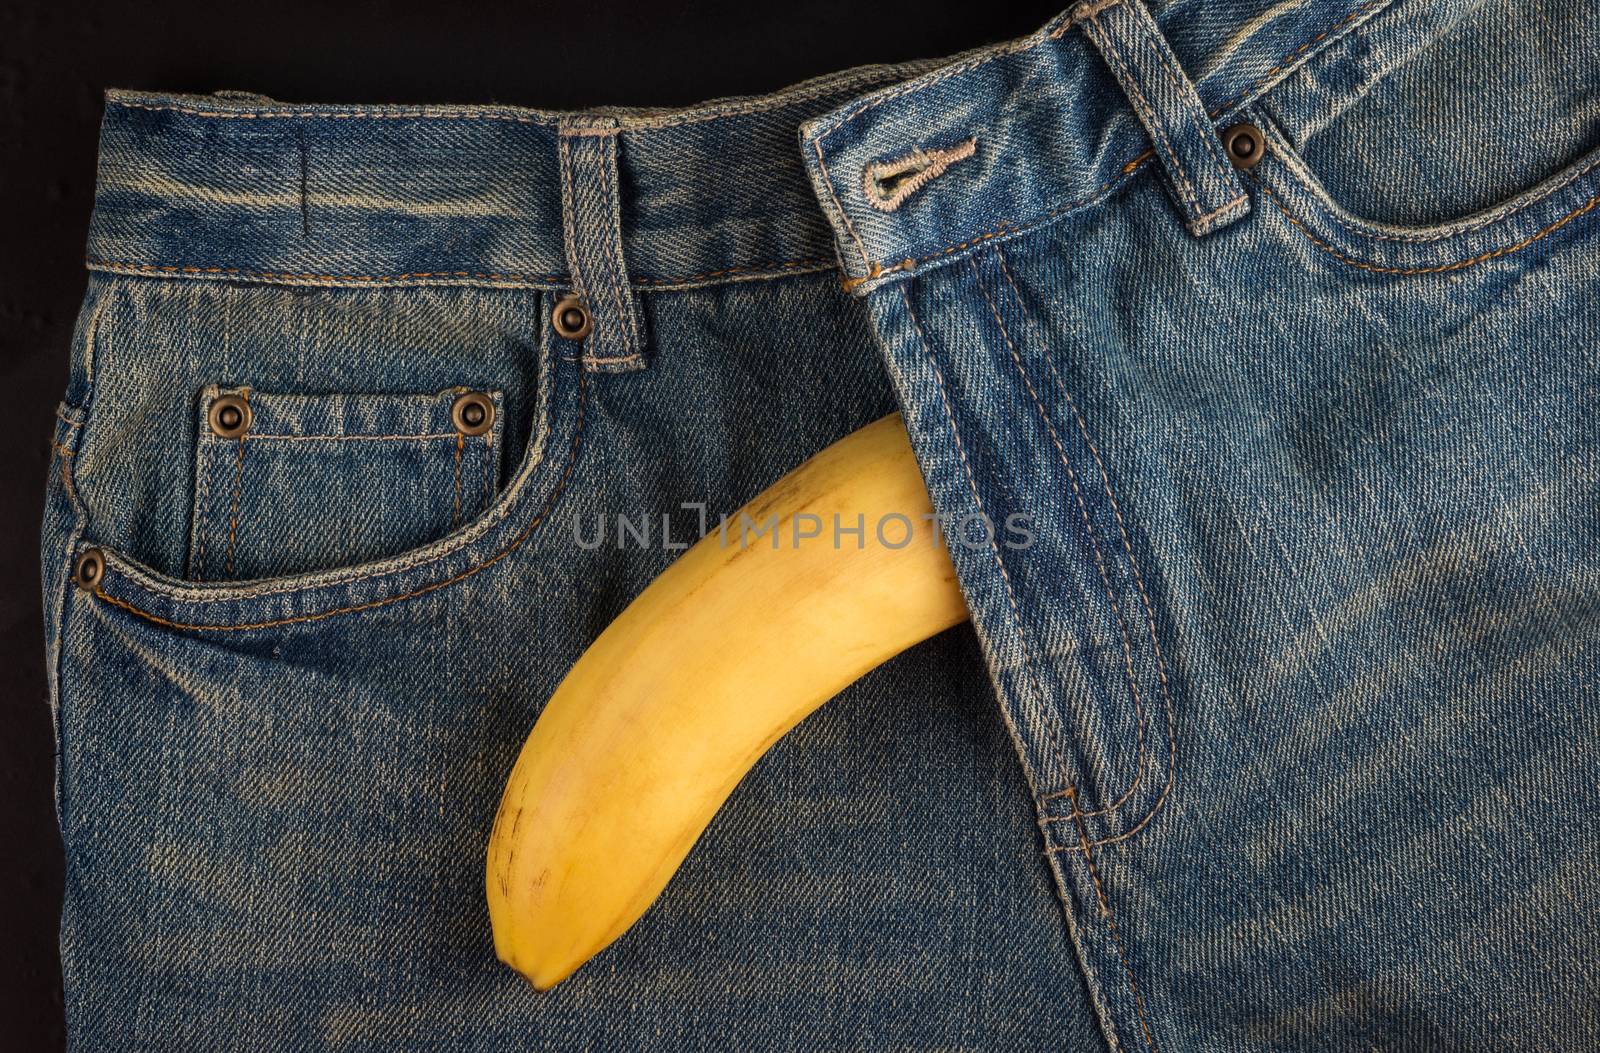 Big Banana and men's jeans, like the penis by iprachenko